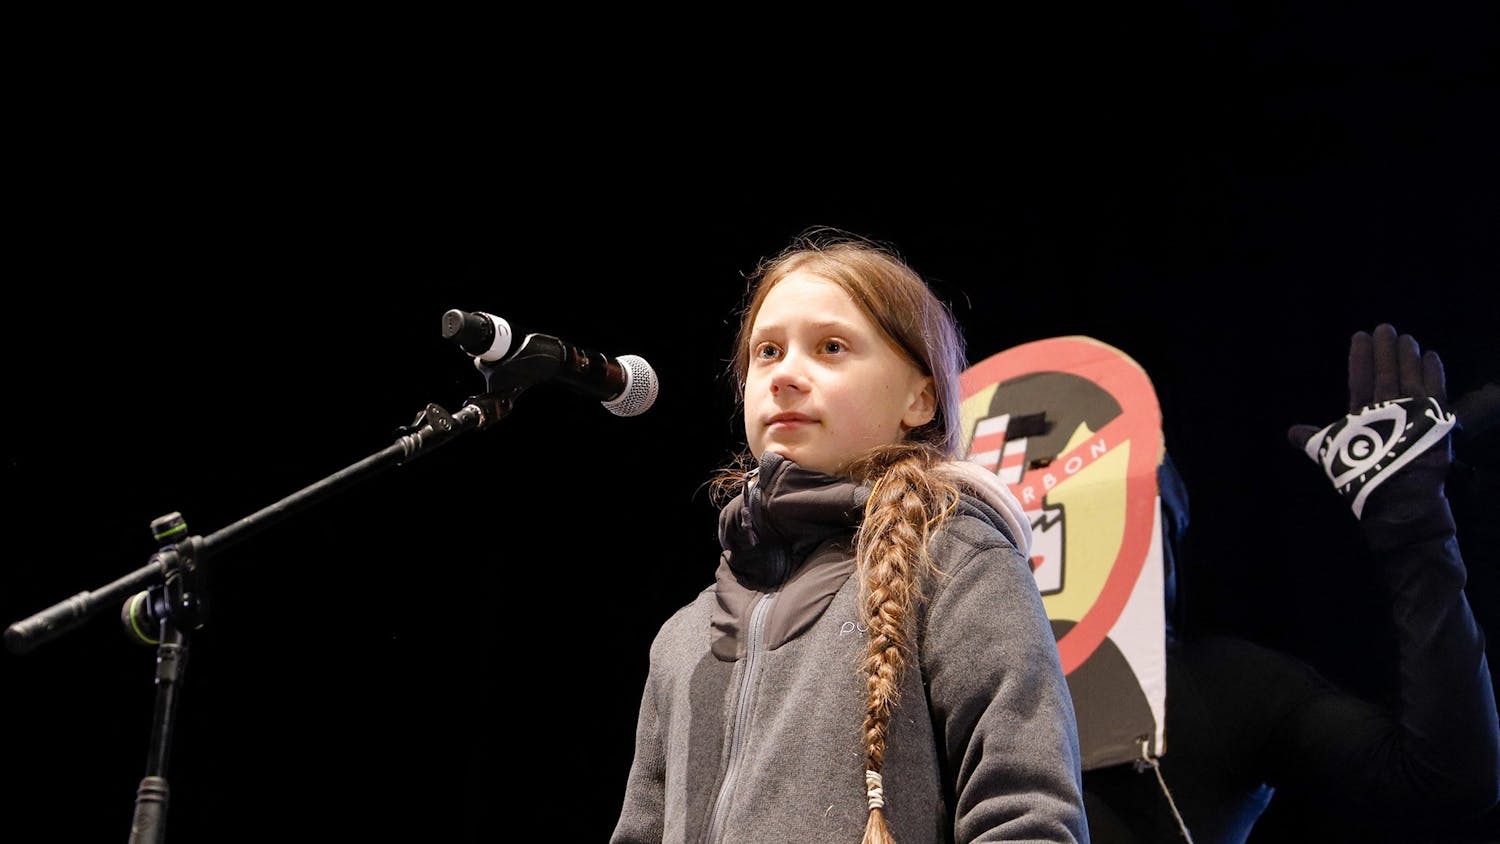 Swedish climate activist Greta Thunberg speaks at the climate march during the COP25 U.N. Climate Conference 2019. Thunberg is the youngest ever Time Person of the Year.